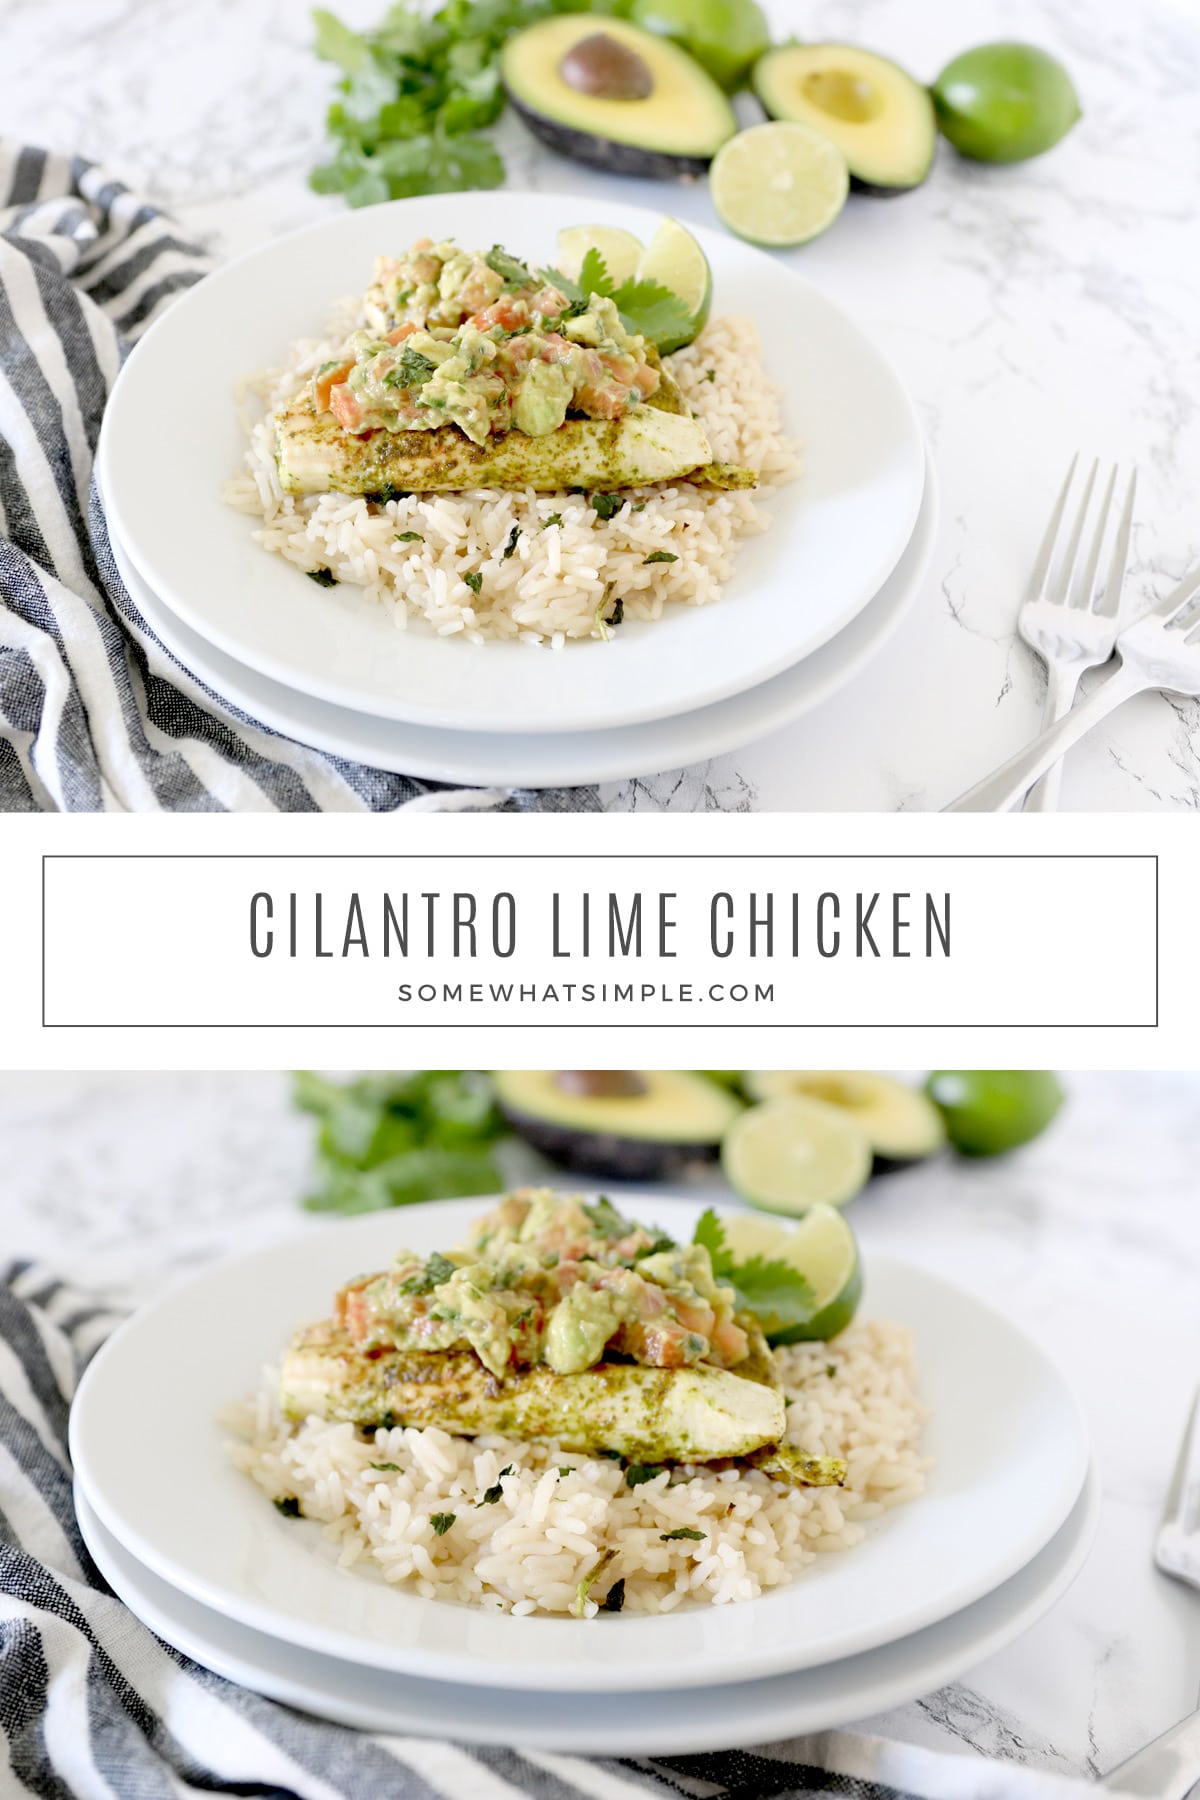 Cilantro Lime Chicken is a healthy dinner that's full of flavor and so easy to make! Top it with a simple Avocado Salsa and you'll have a delicious dinner that looks and tastes absolutely amazing! via @somewhatsimple